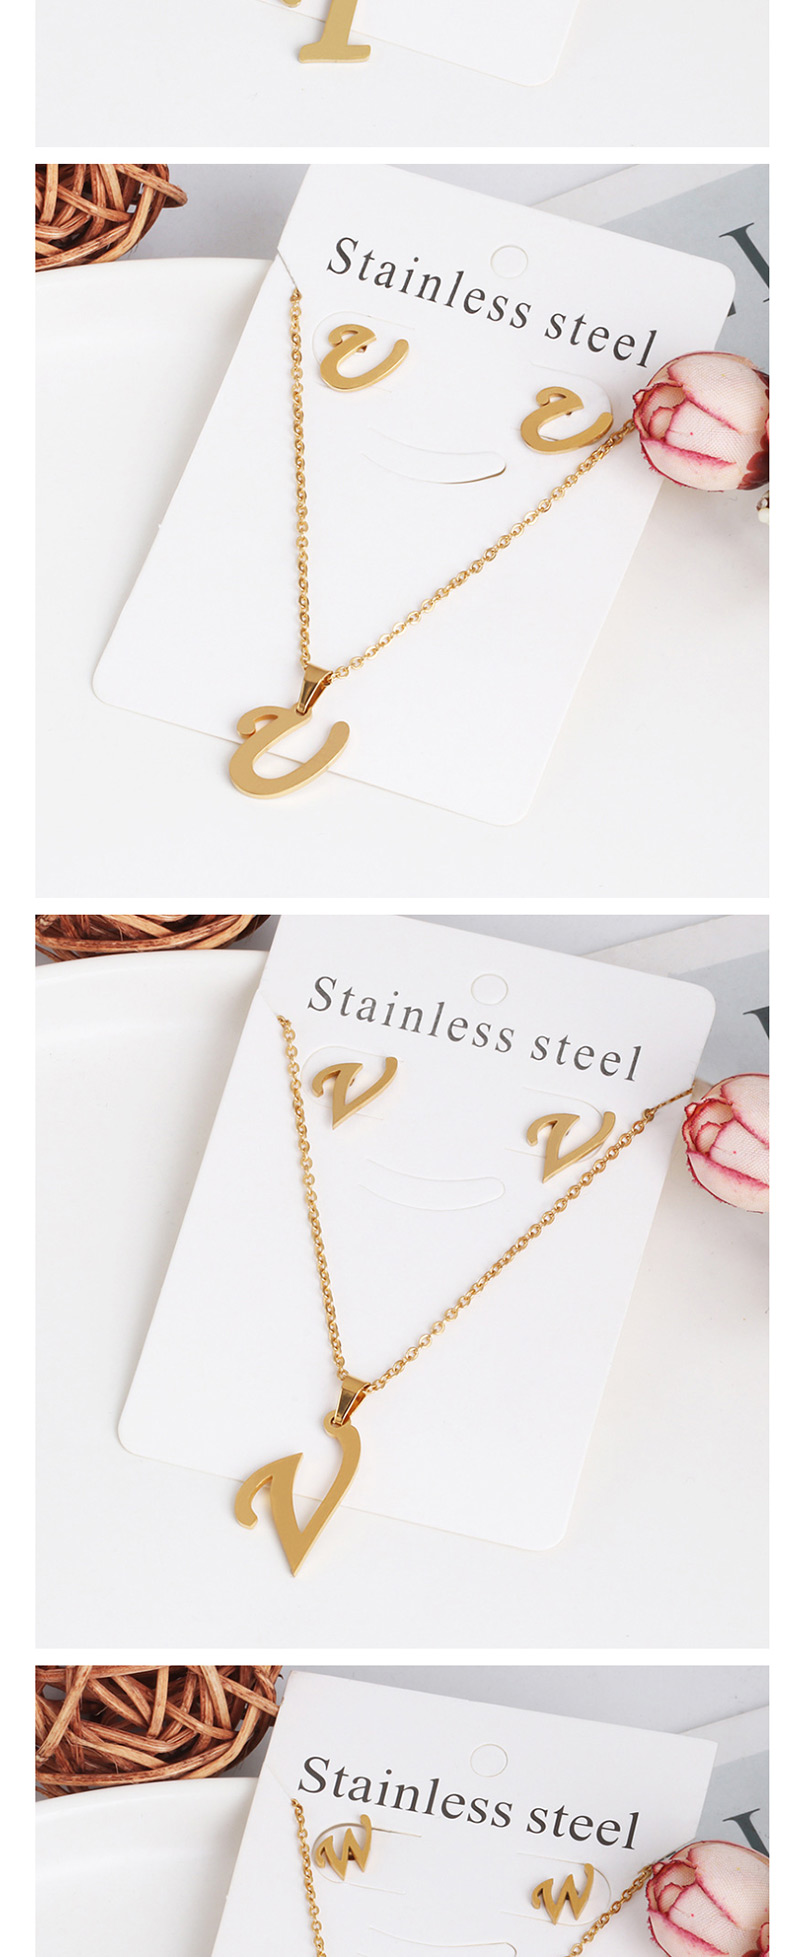 Fashion J Gold Stainless Steel Letter Necklace Earrings Two-piece,Jewelry Sets